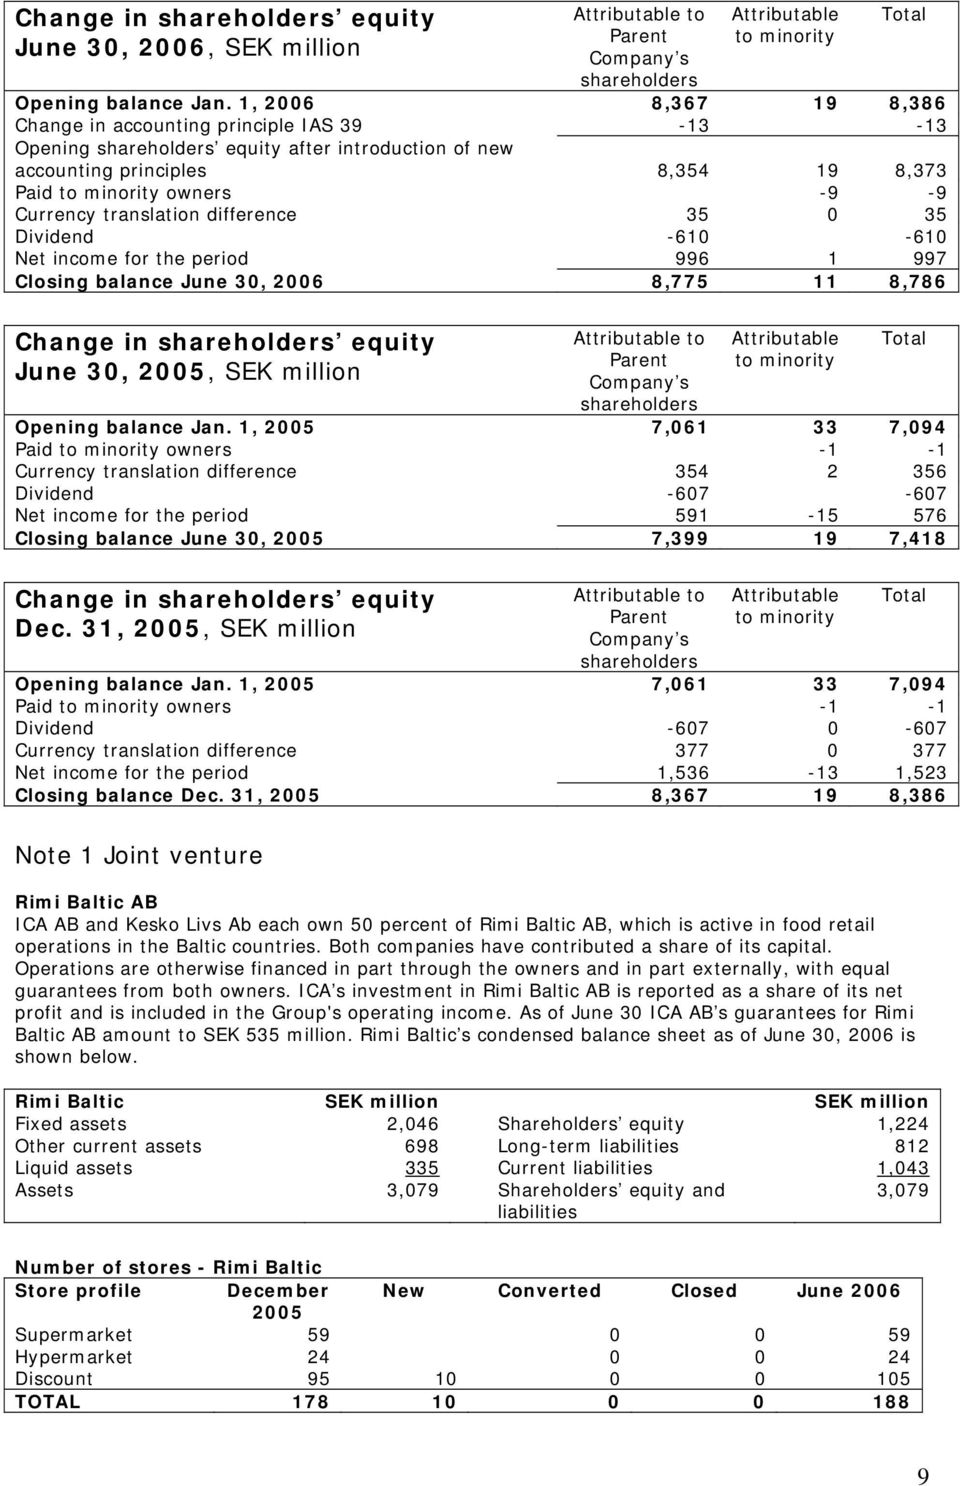 translation difference 35 0 35 Dividend -610-610 Net income for the period 996 1 997 Closing balance June 30, 2006 8,775 11 8,786 Change in shareholders equity June 30, 2005, SEK million Attributable